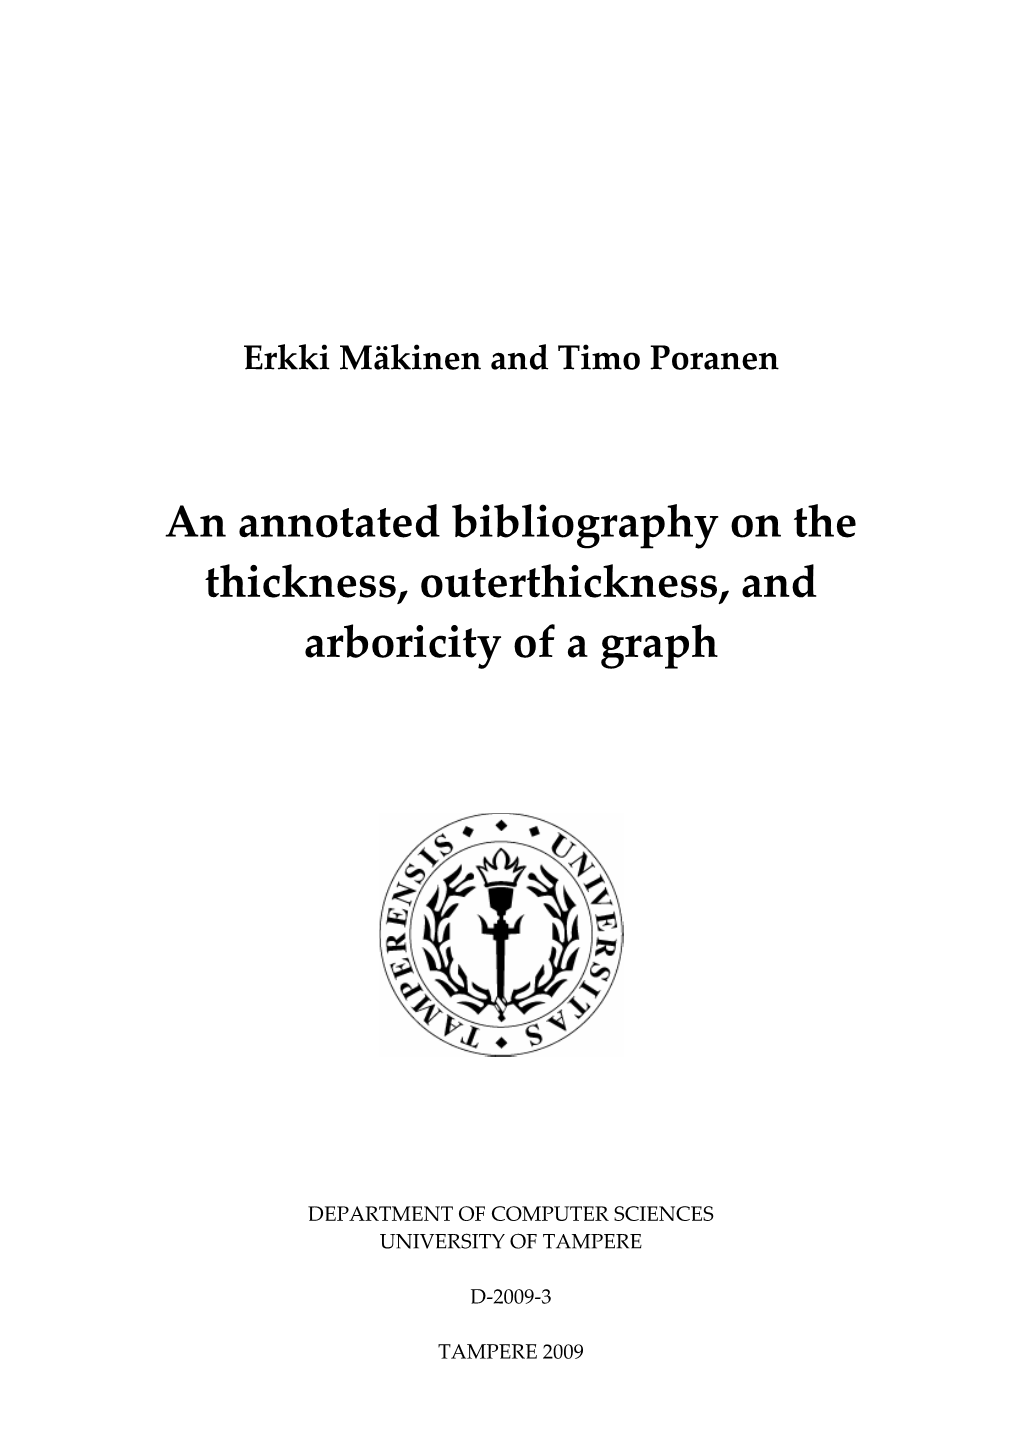 An Annotated Bibliography on the Thickness, Outerthickness, and Arboricity of a Graph